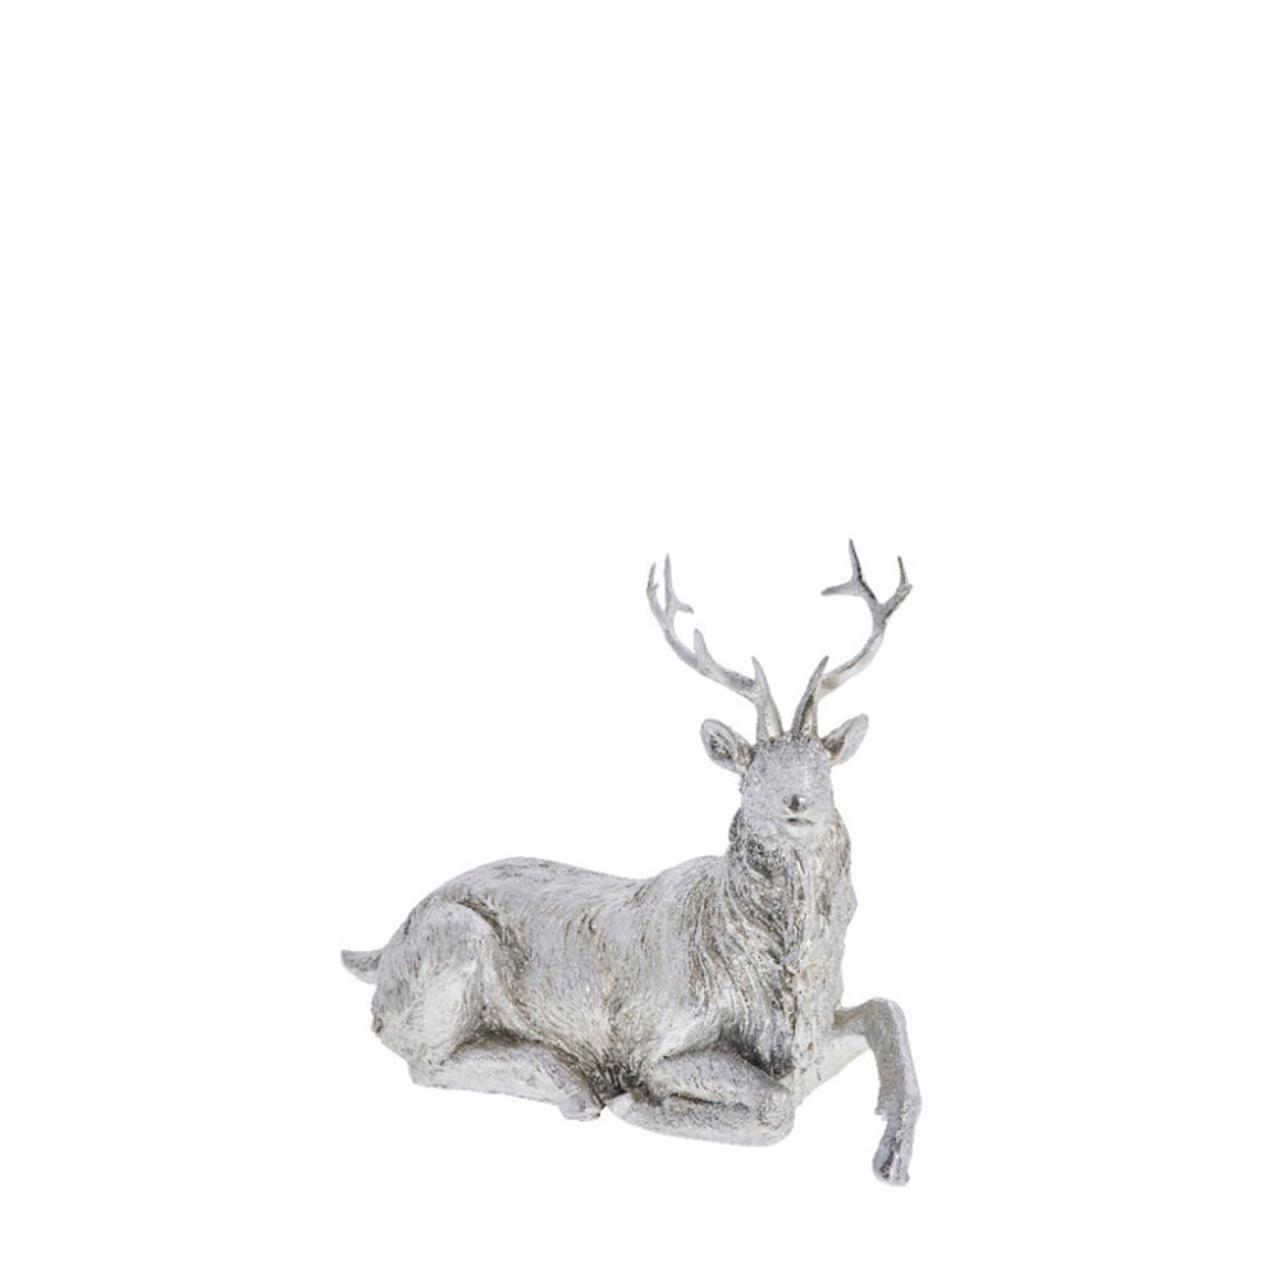 Deer head glitter silver faux taxidermy resin stag weston almost december antlers wall